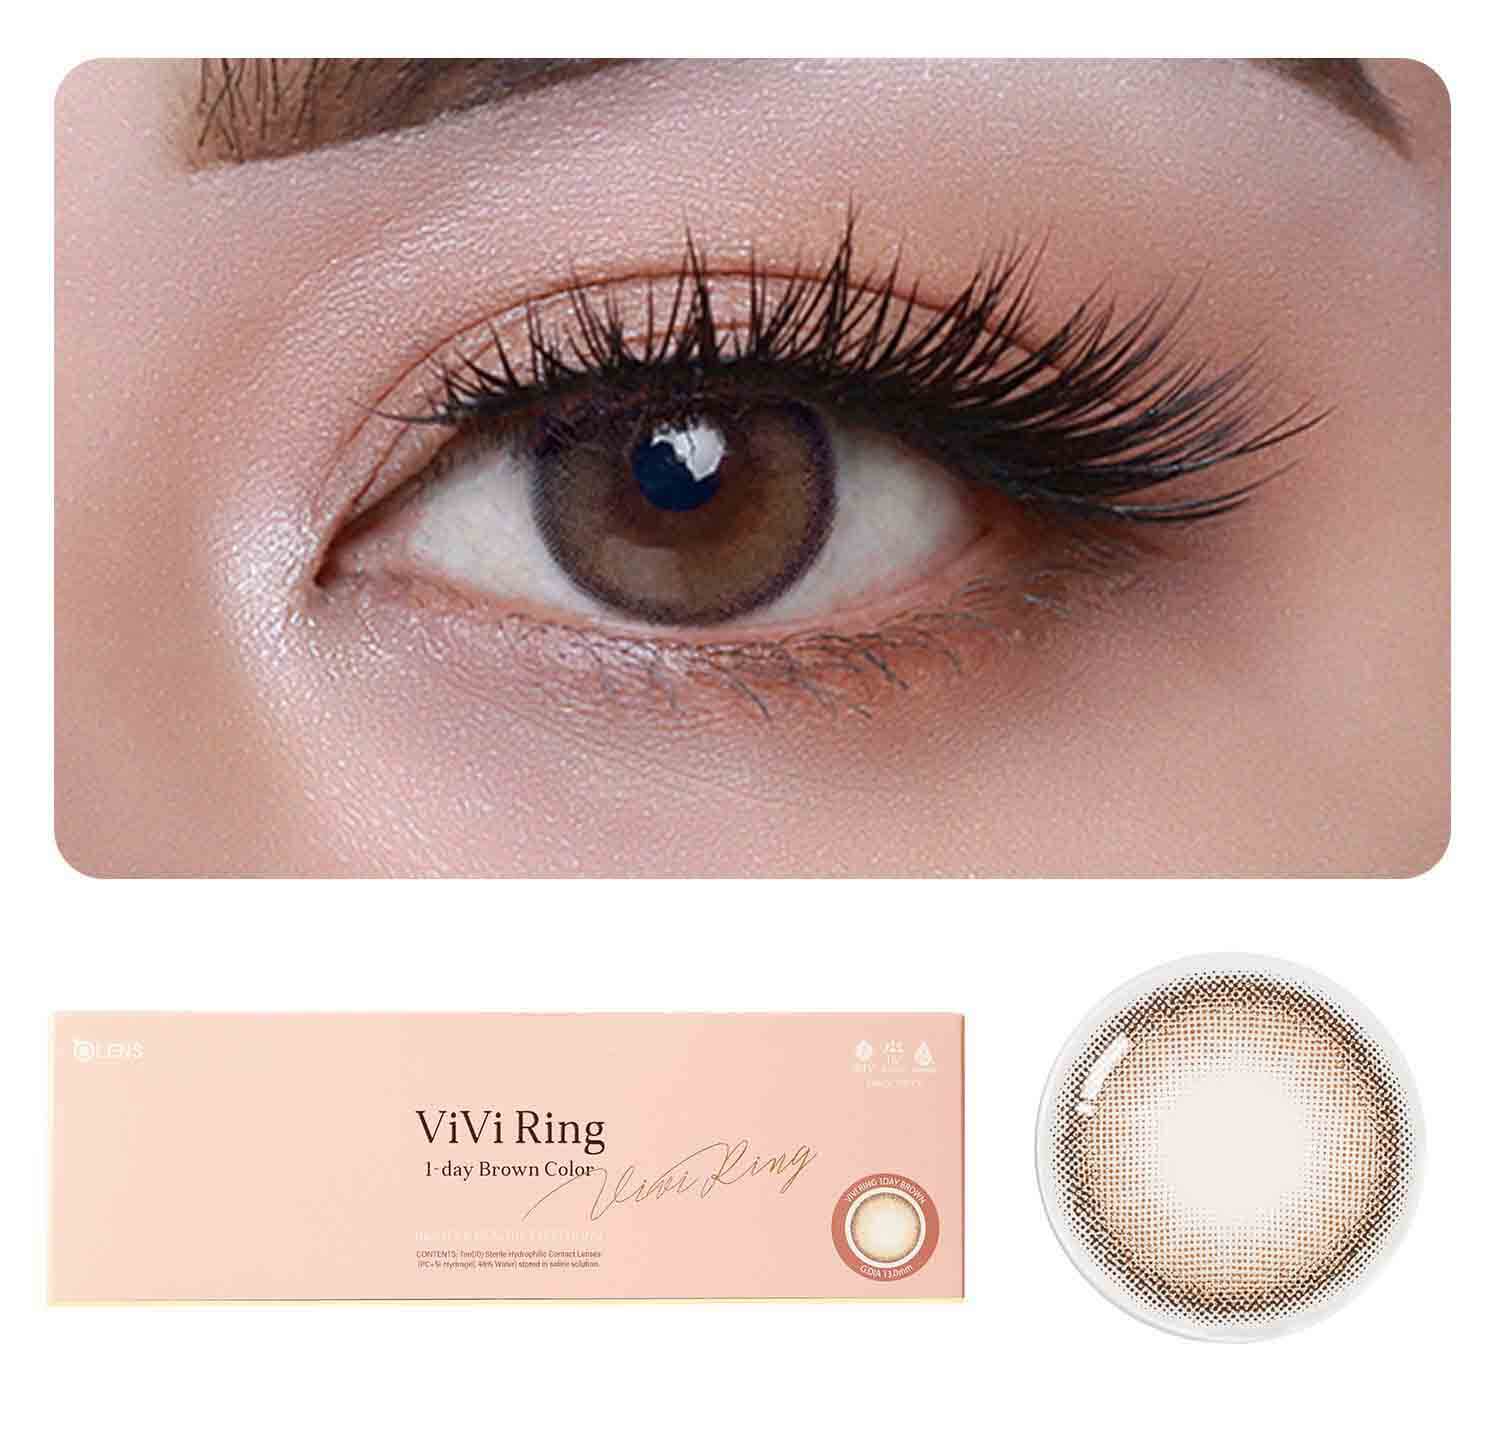 OLENS Premium Color Contact Lens | Vivi ring 1 day disposable trial Pack | o-lens.co.in